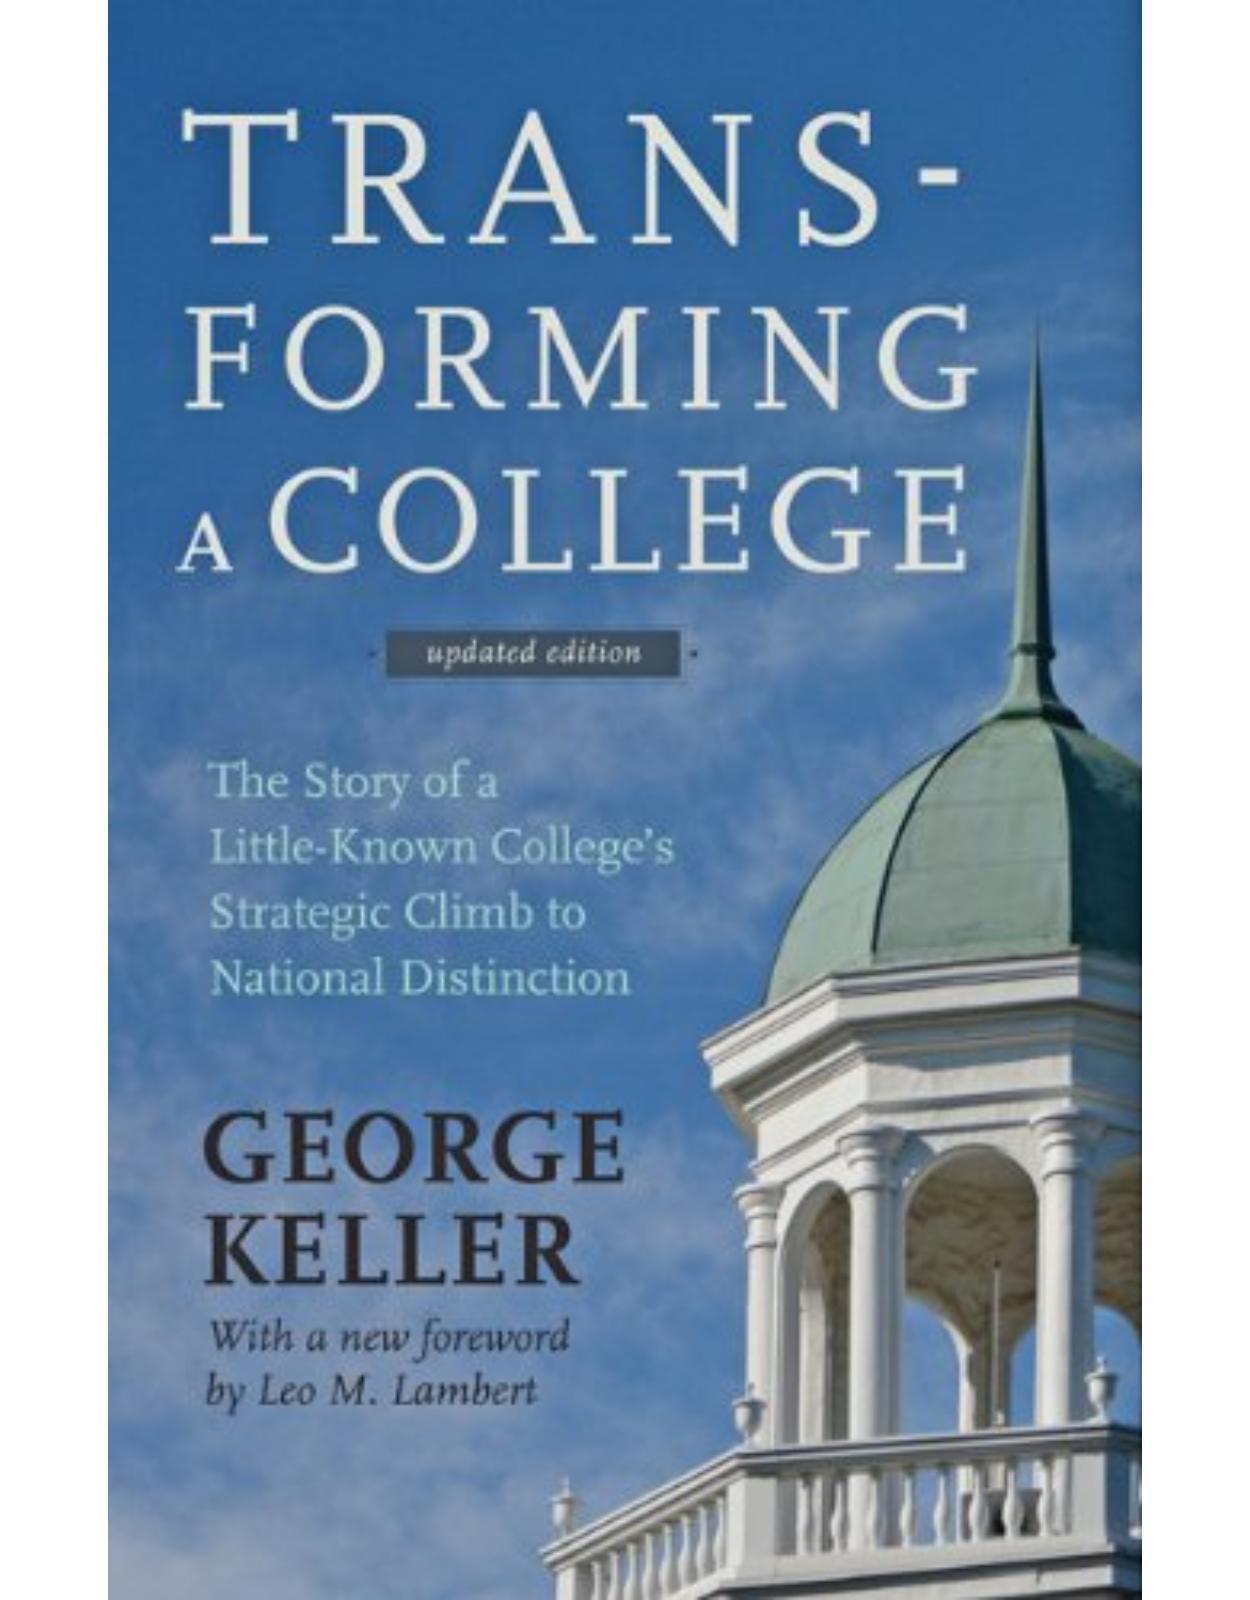 Transforming a College, The Story of a Little-Known College's Strategic Climb to National Distinction (Updated Edition)